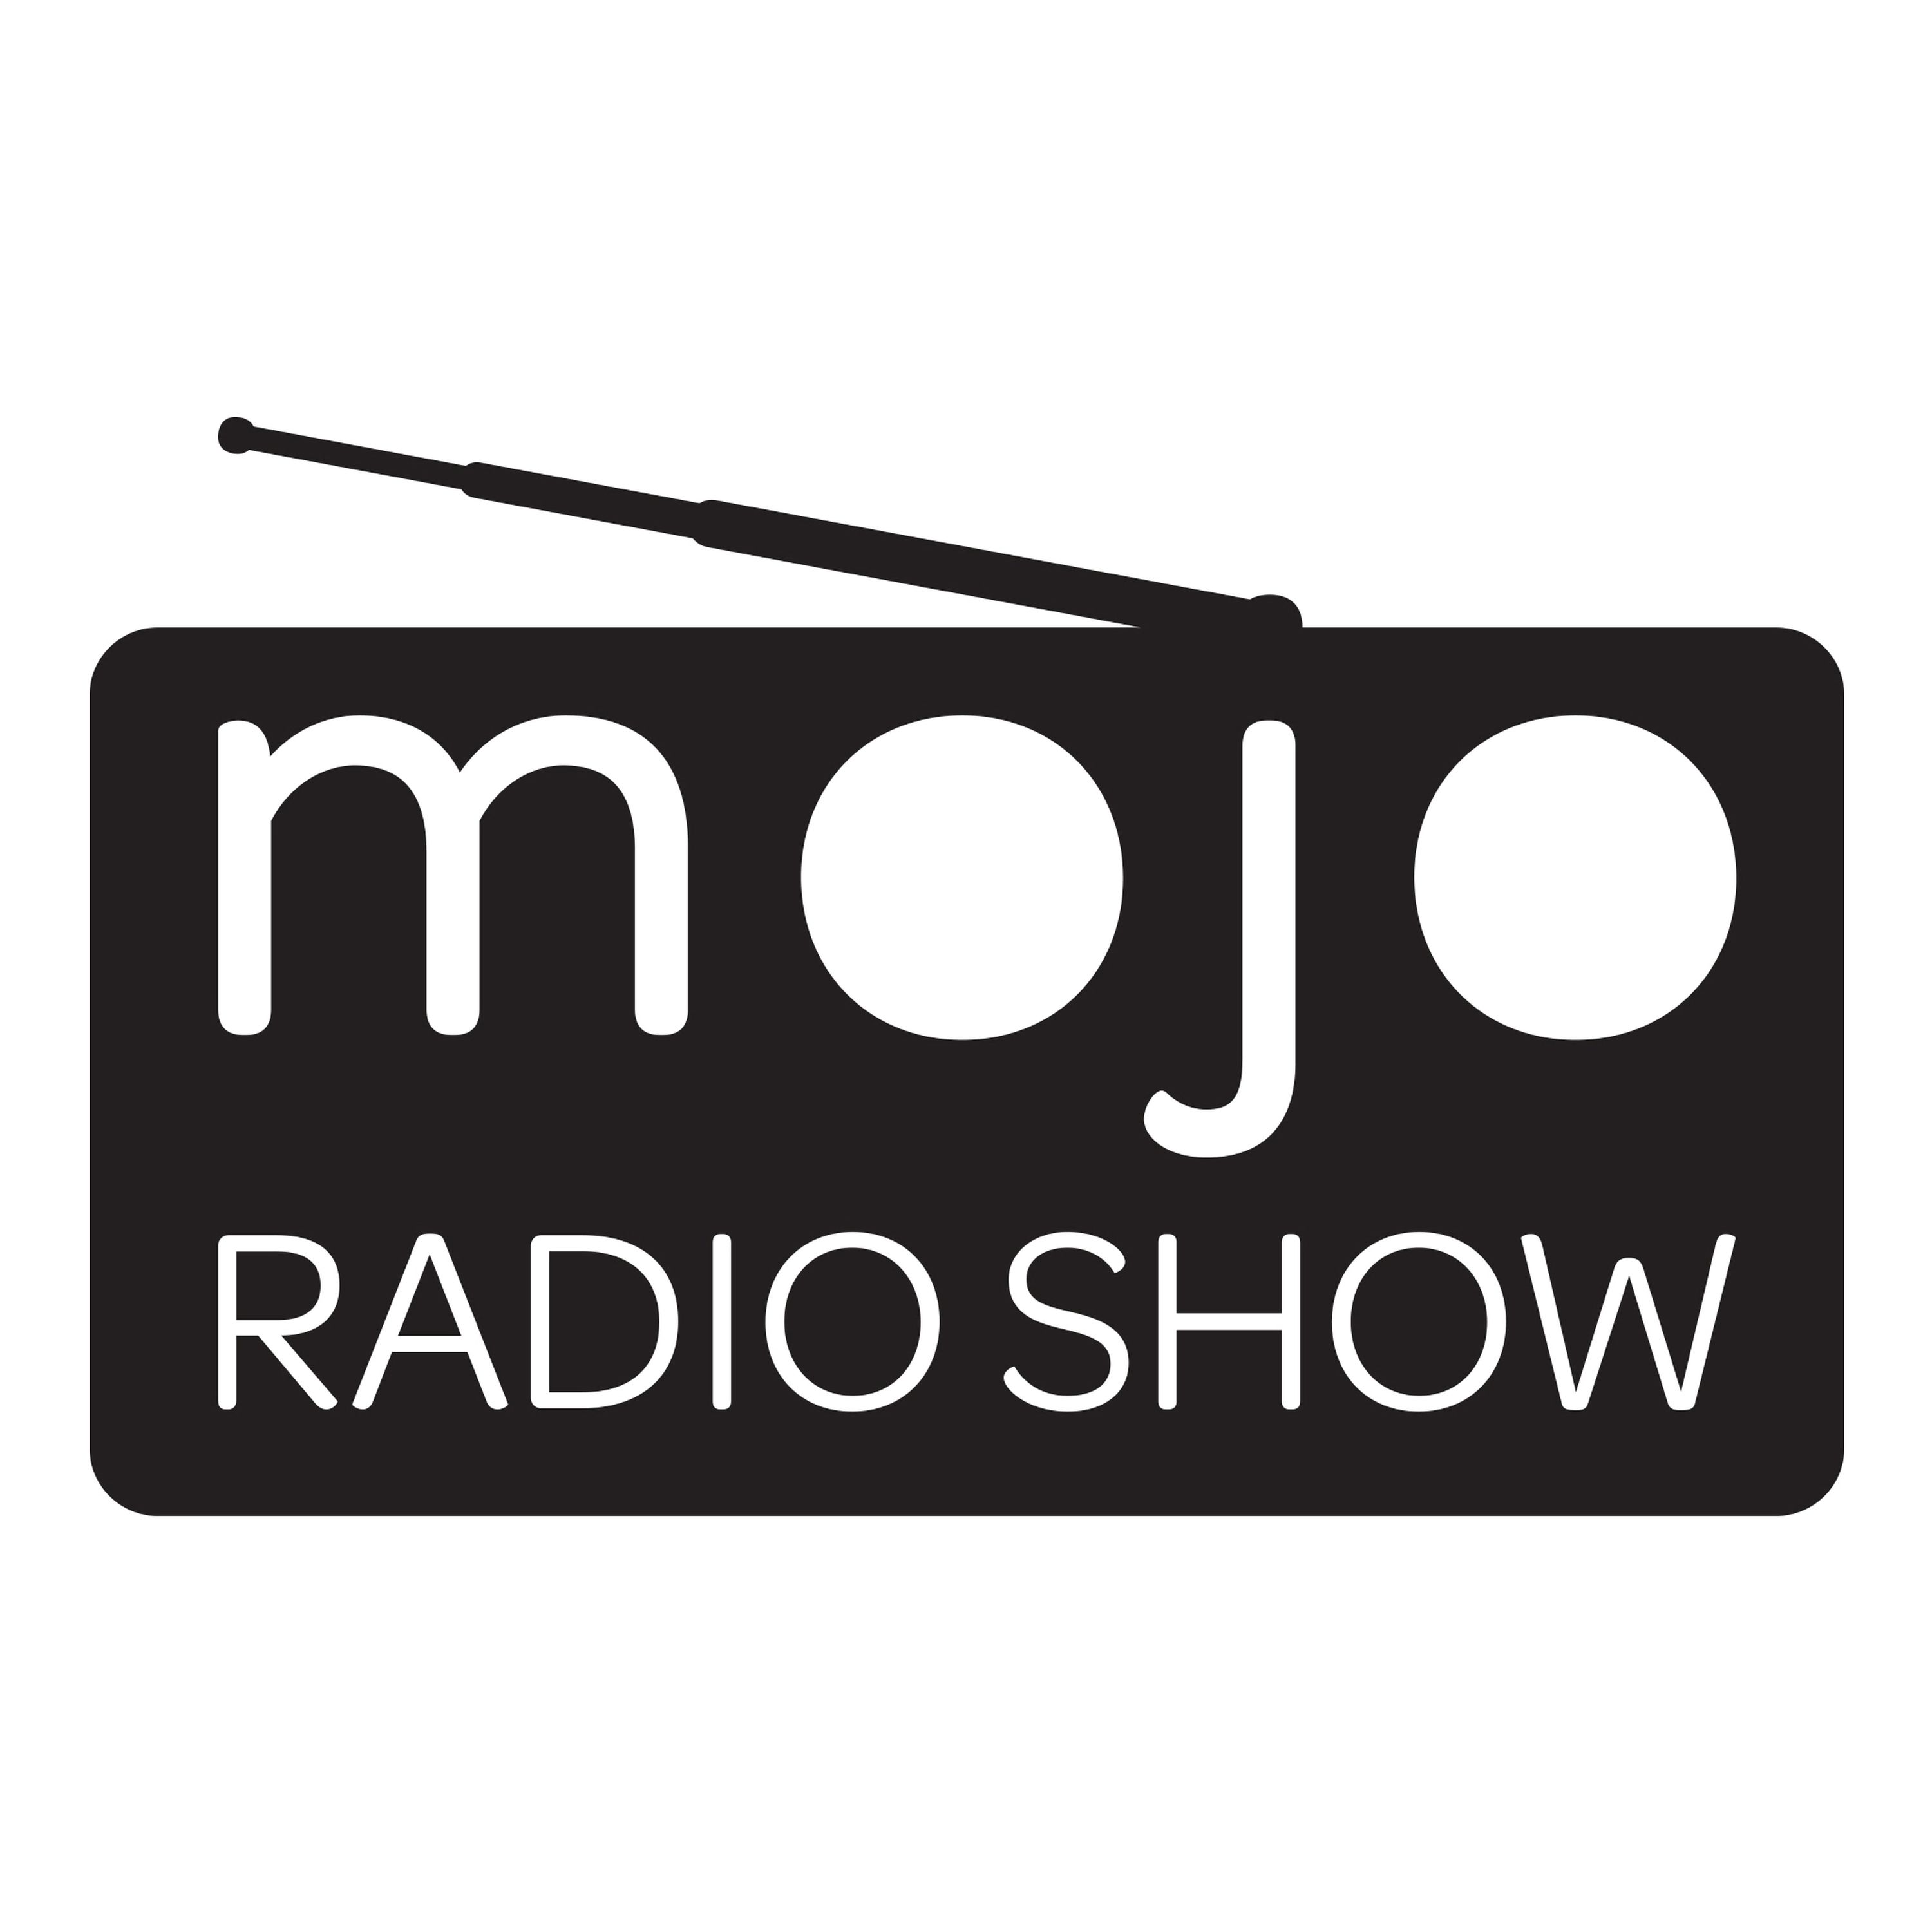 The Mojo Radio Show EP 165: Living a Fulfilled Life and Realising Our True Potential - Kasper van de Meulen